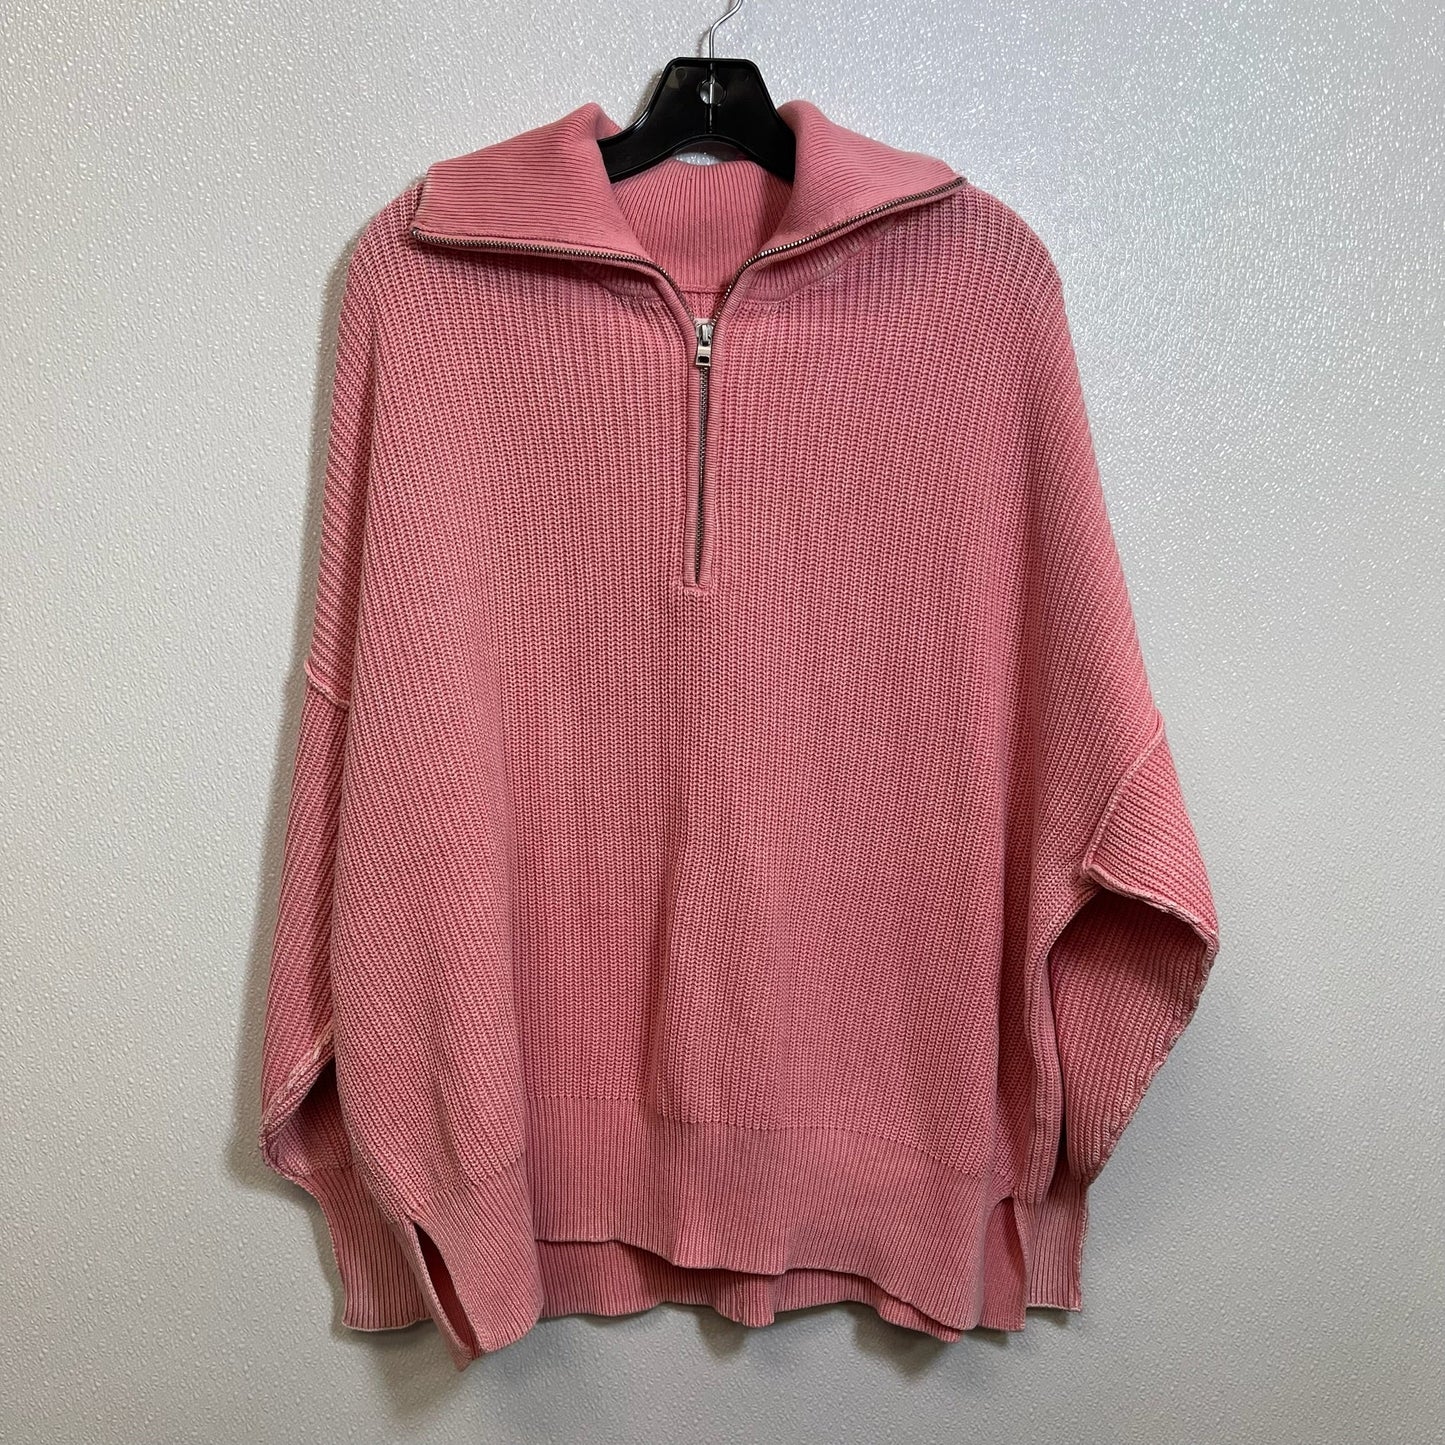 Pink Sweater Aerie, Size M